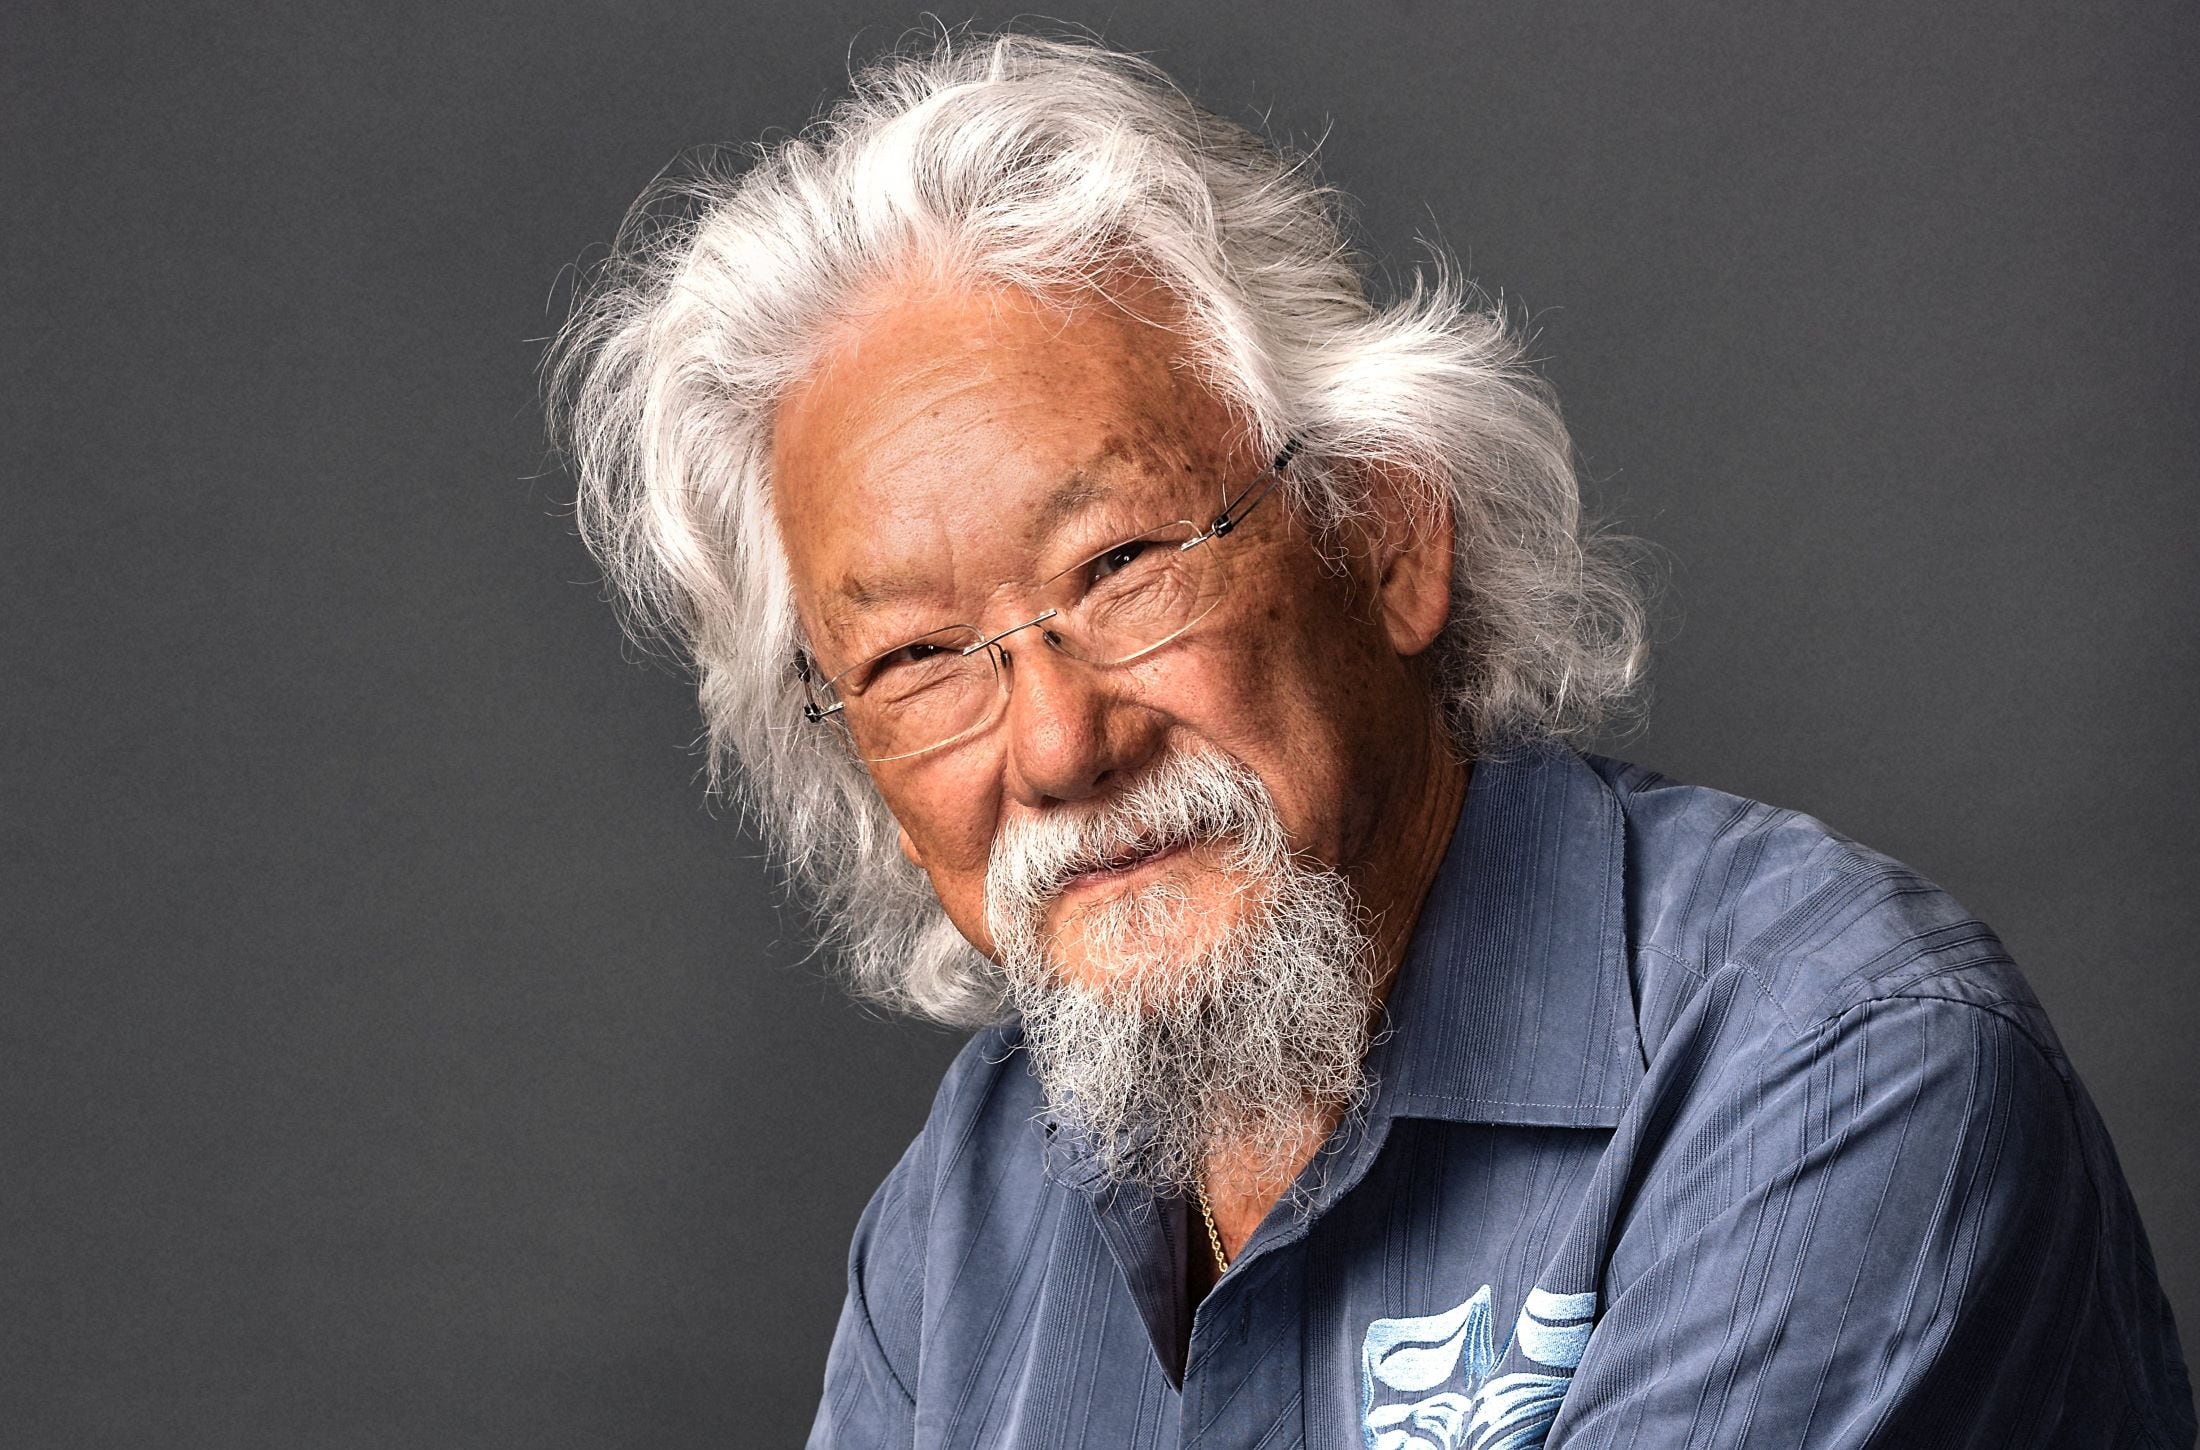 Final column for 2020 from David Suzuki: We have the power to make a brighter future